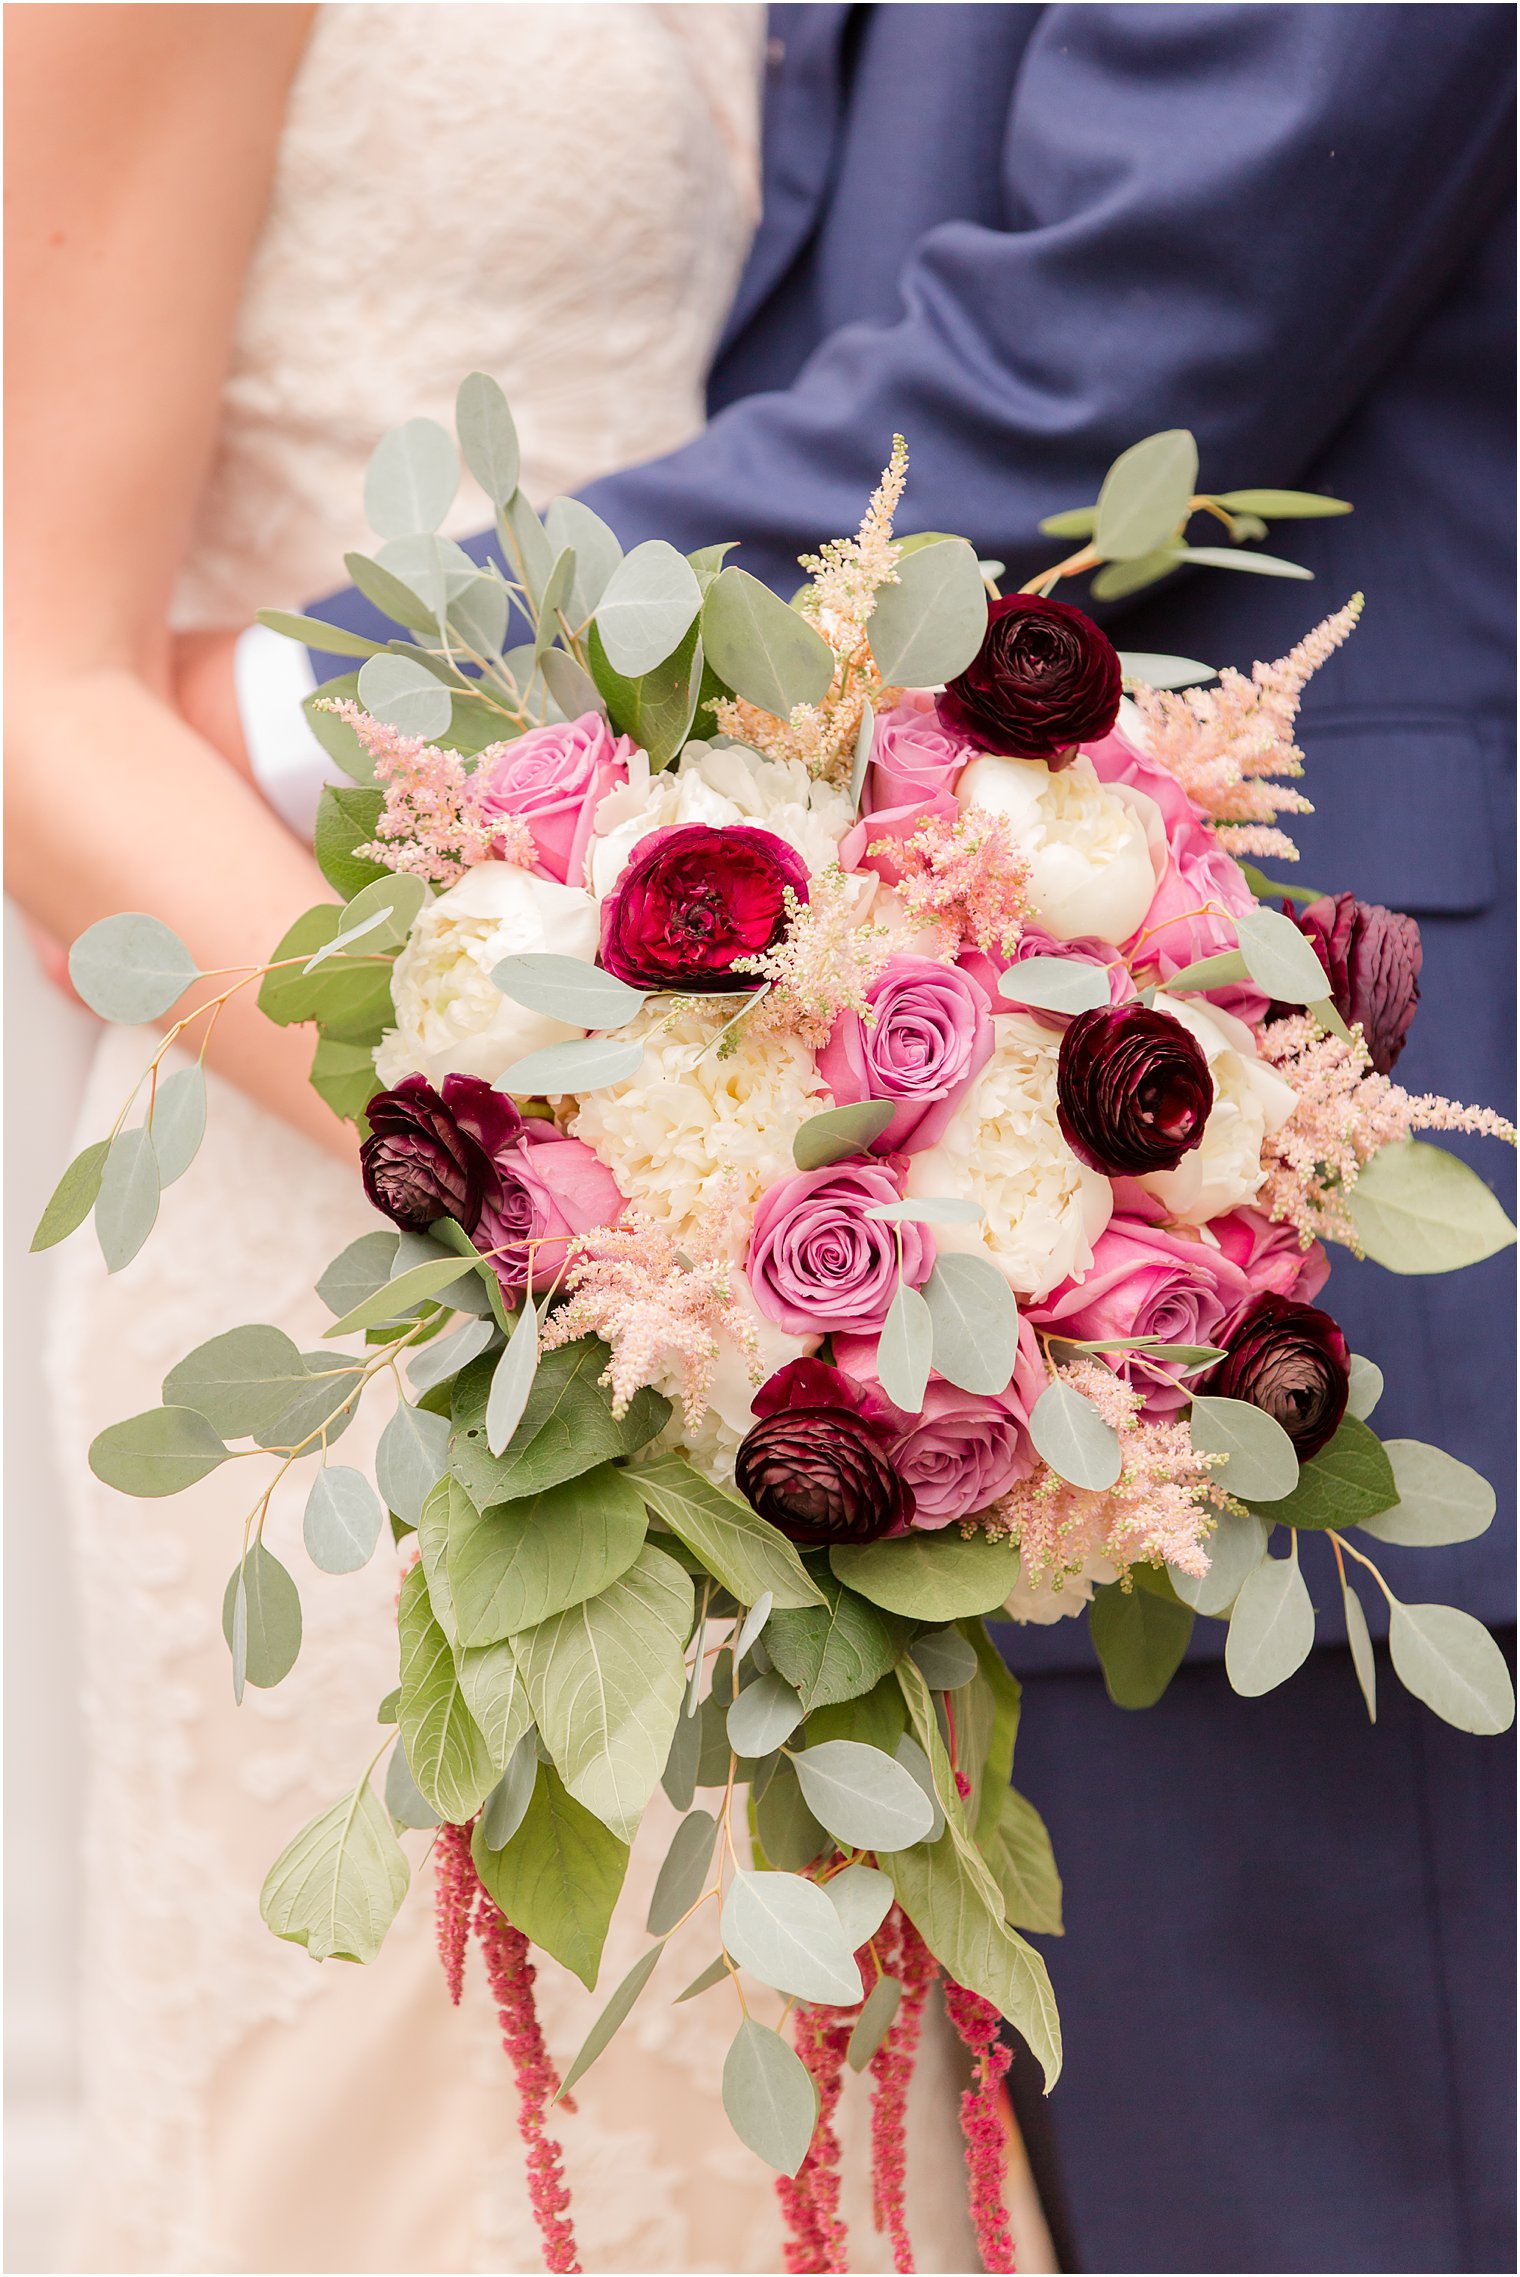 Colorful bouquet by Florals by Kim